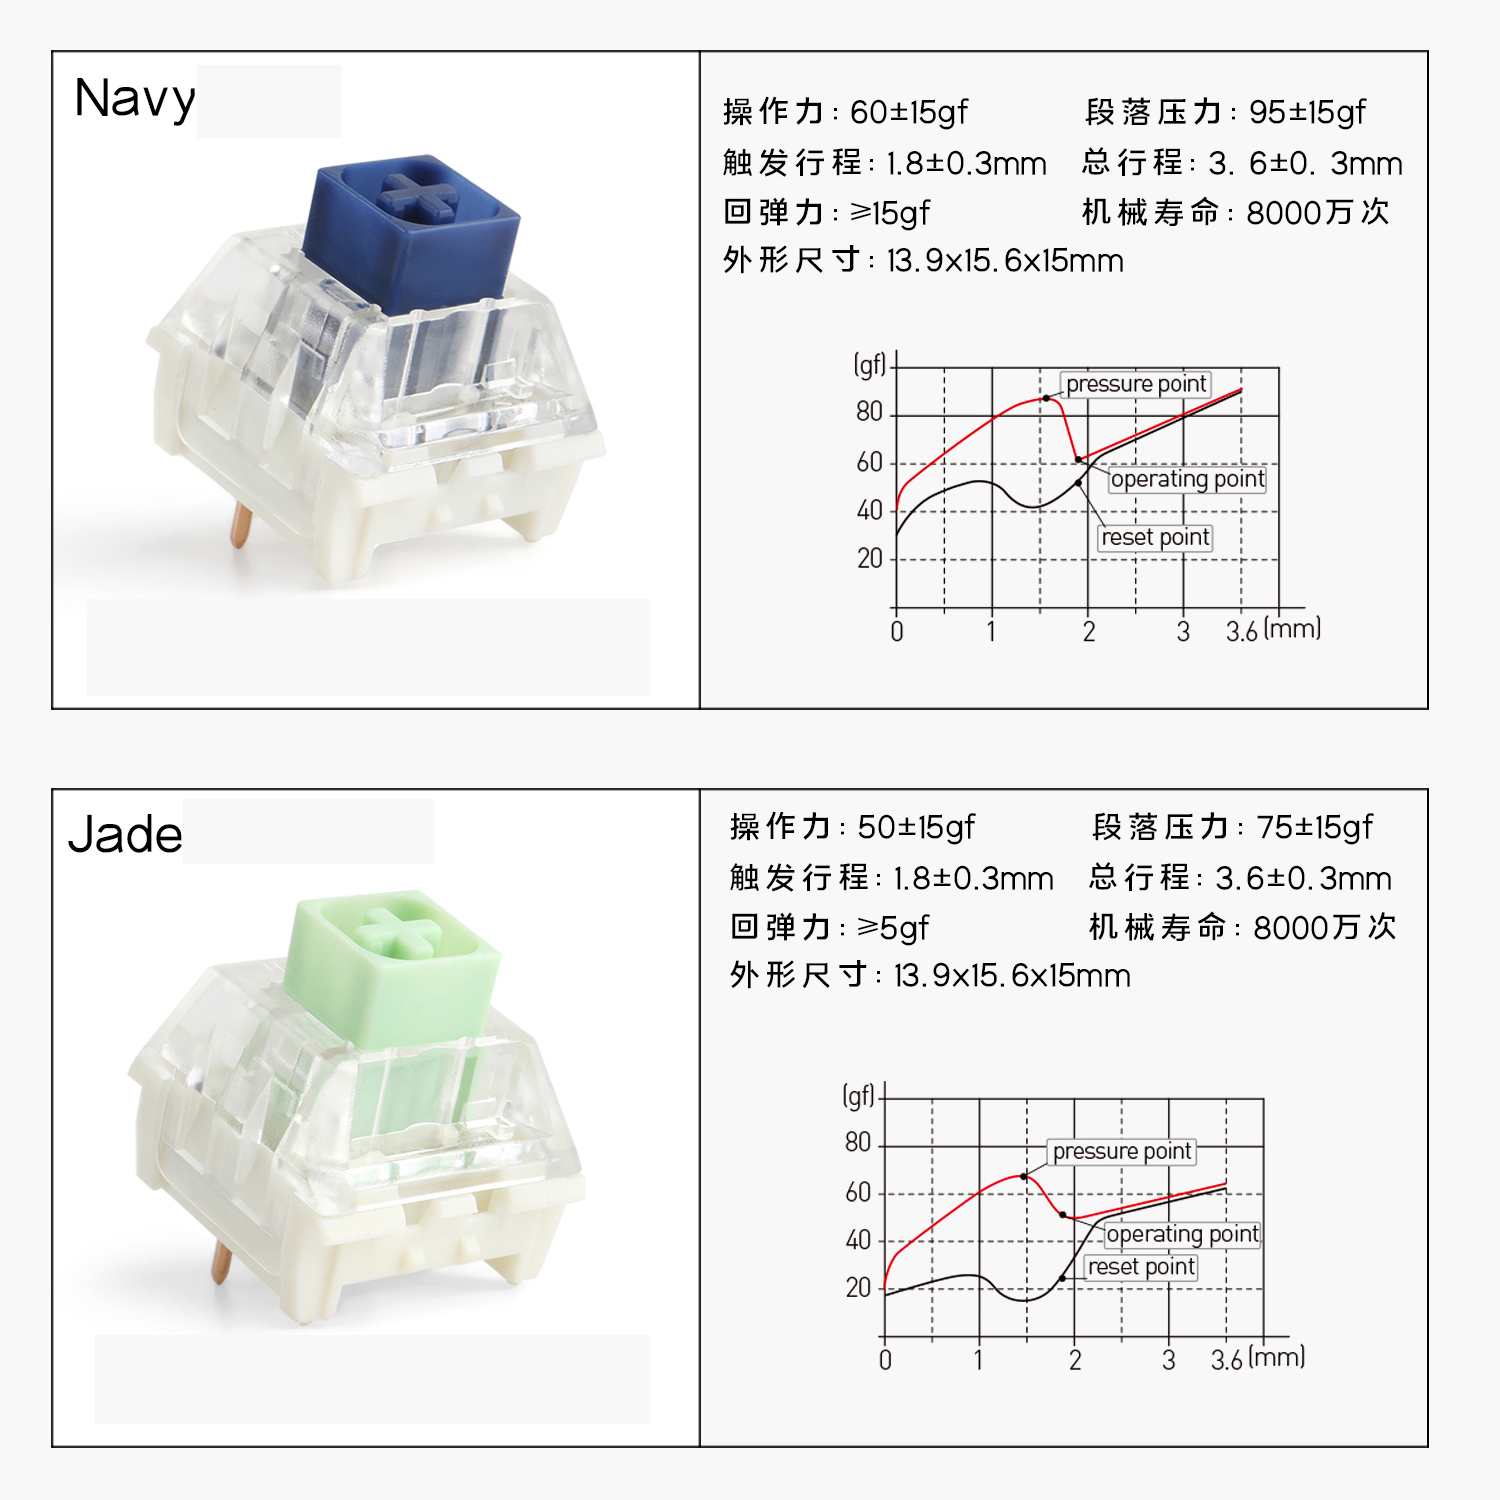 [In Stock] Switch Kailh Box